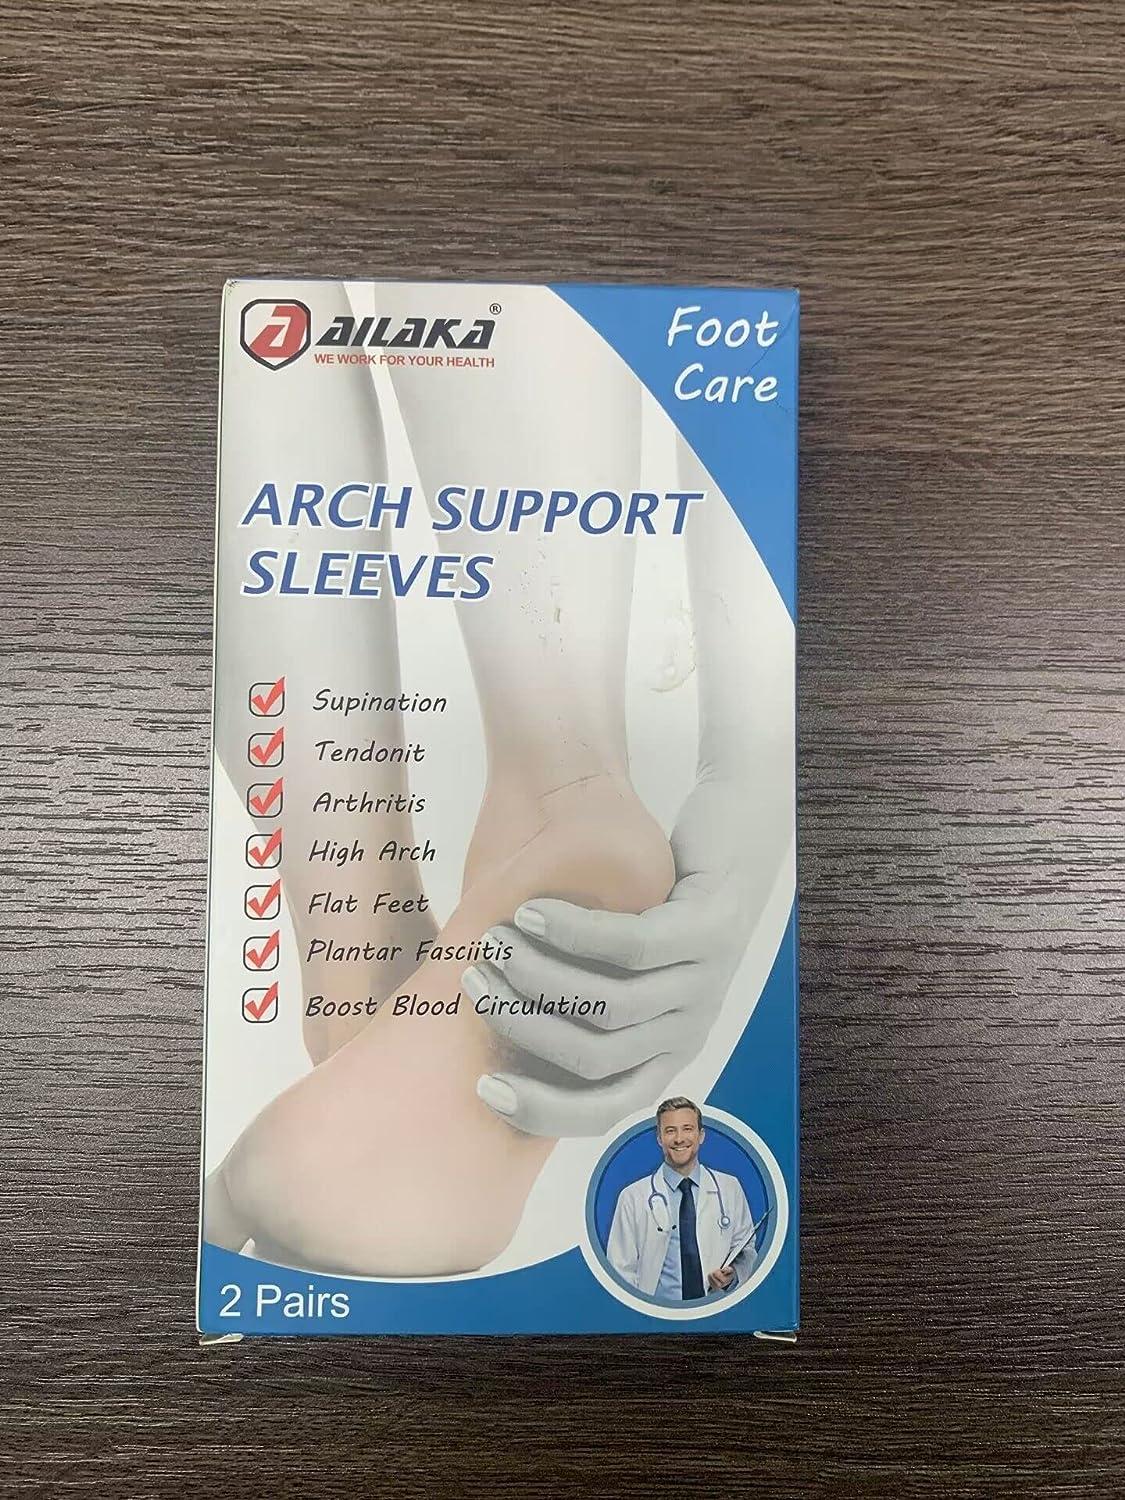 Foot Care Plantar Fasciitis Arch Support Sleeves for foot pain